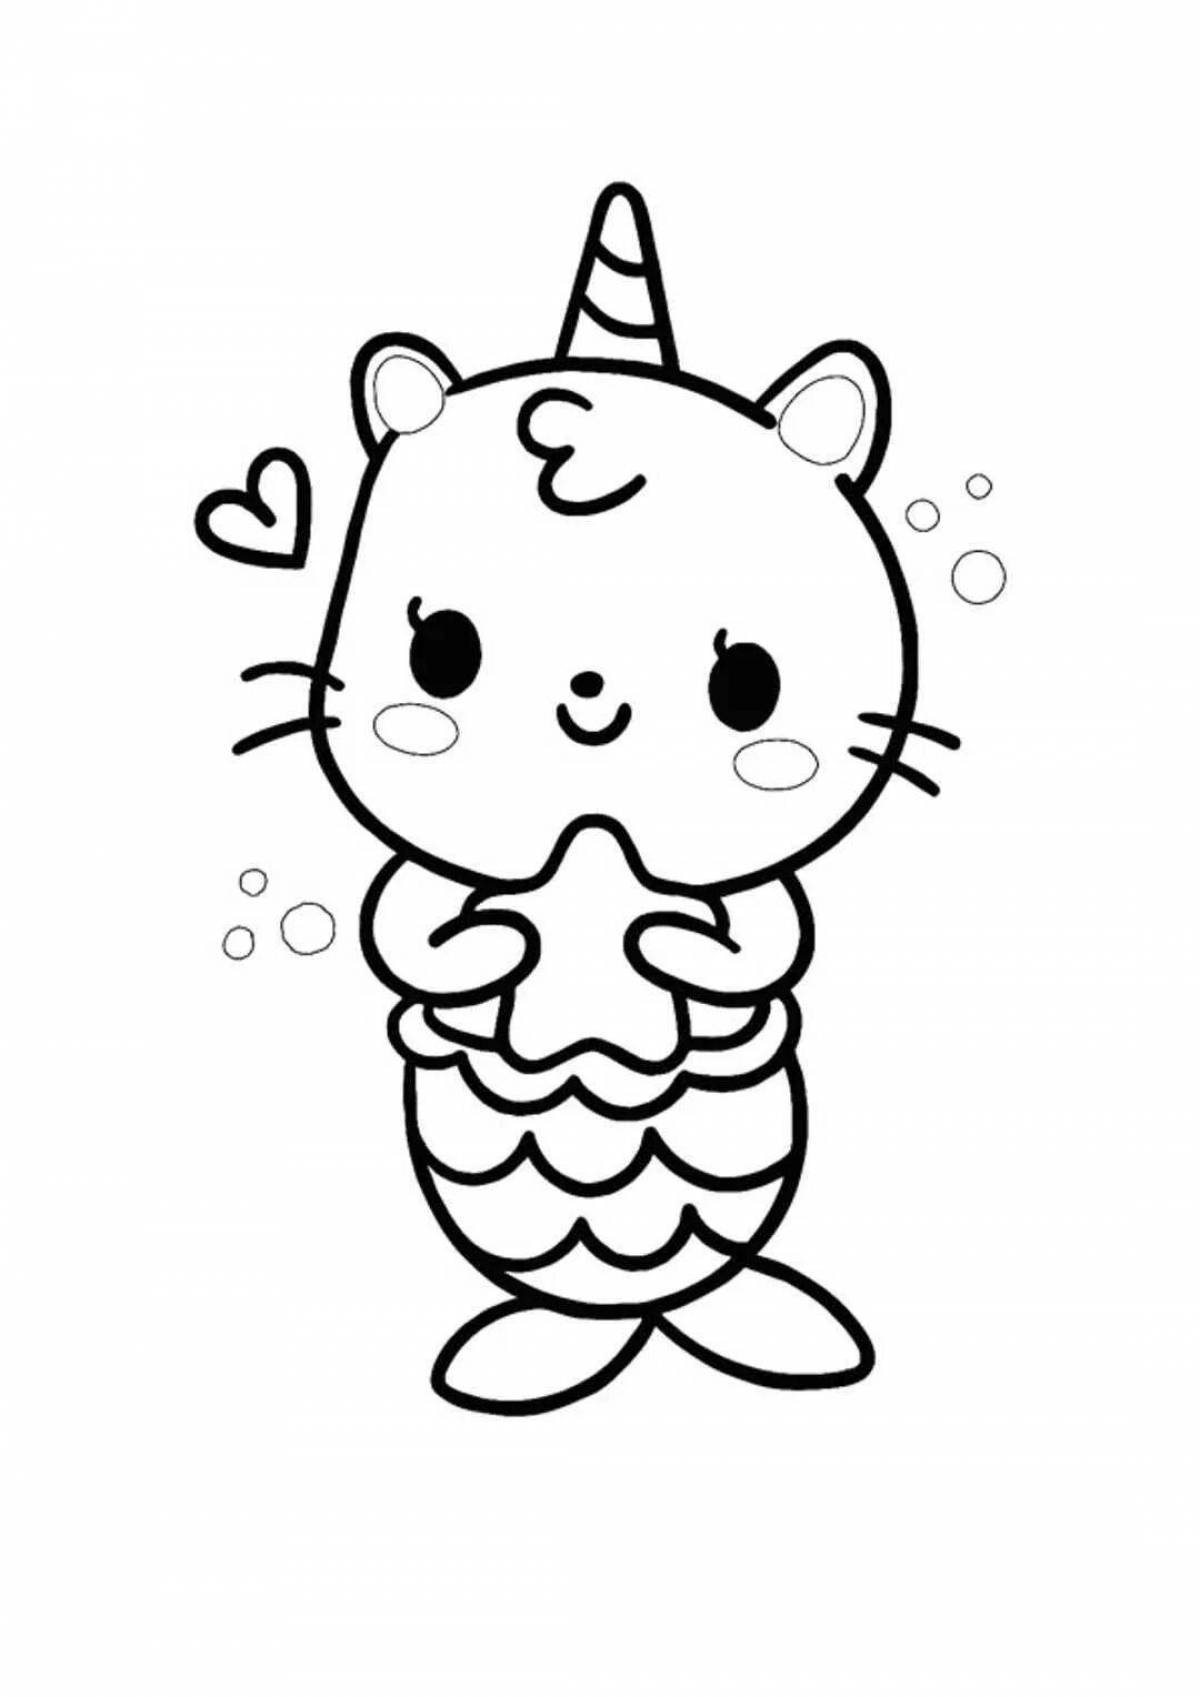 Colorful hello kitty mermaid coloring page